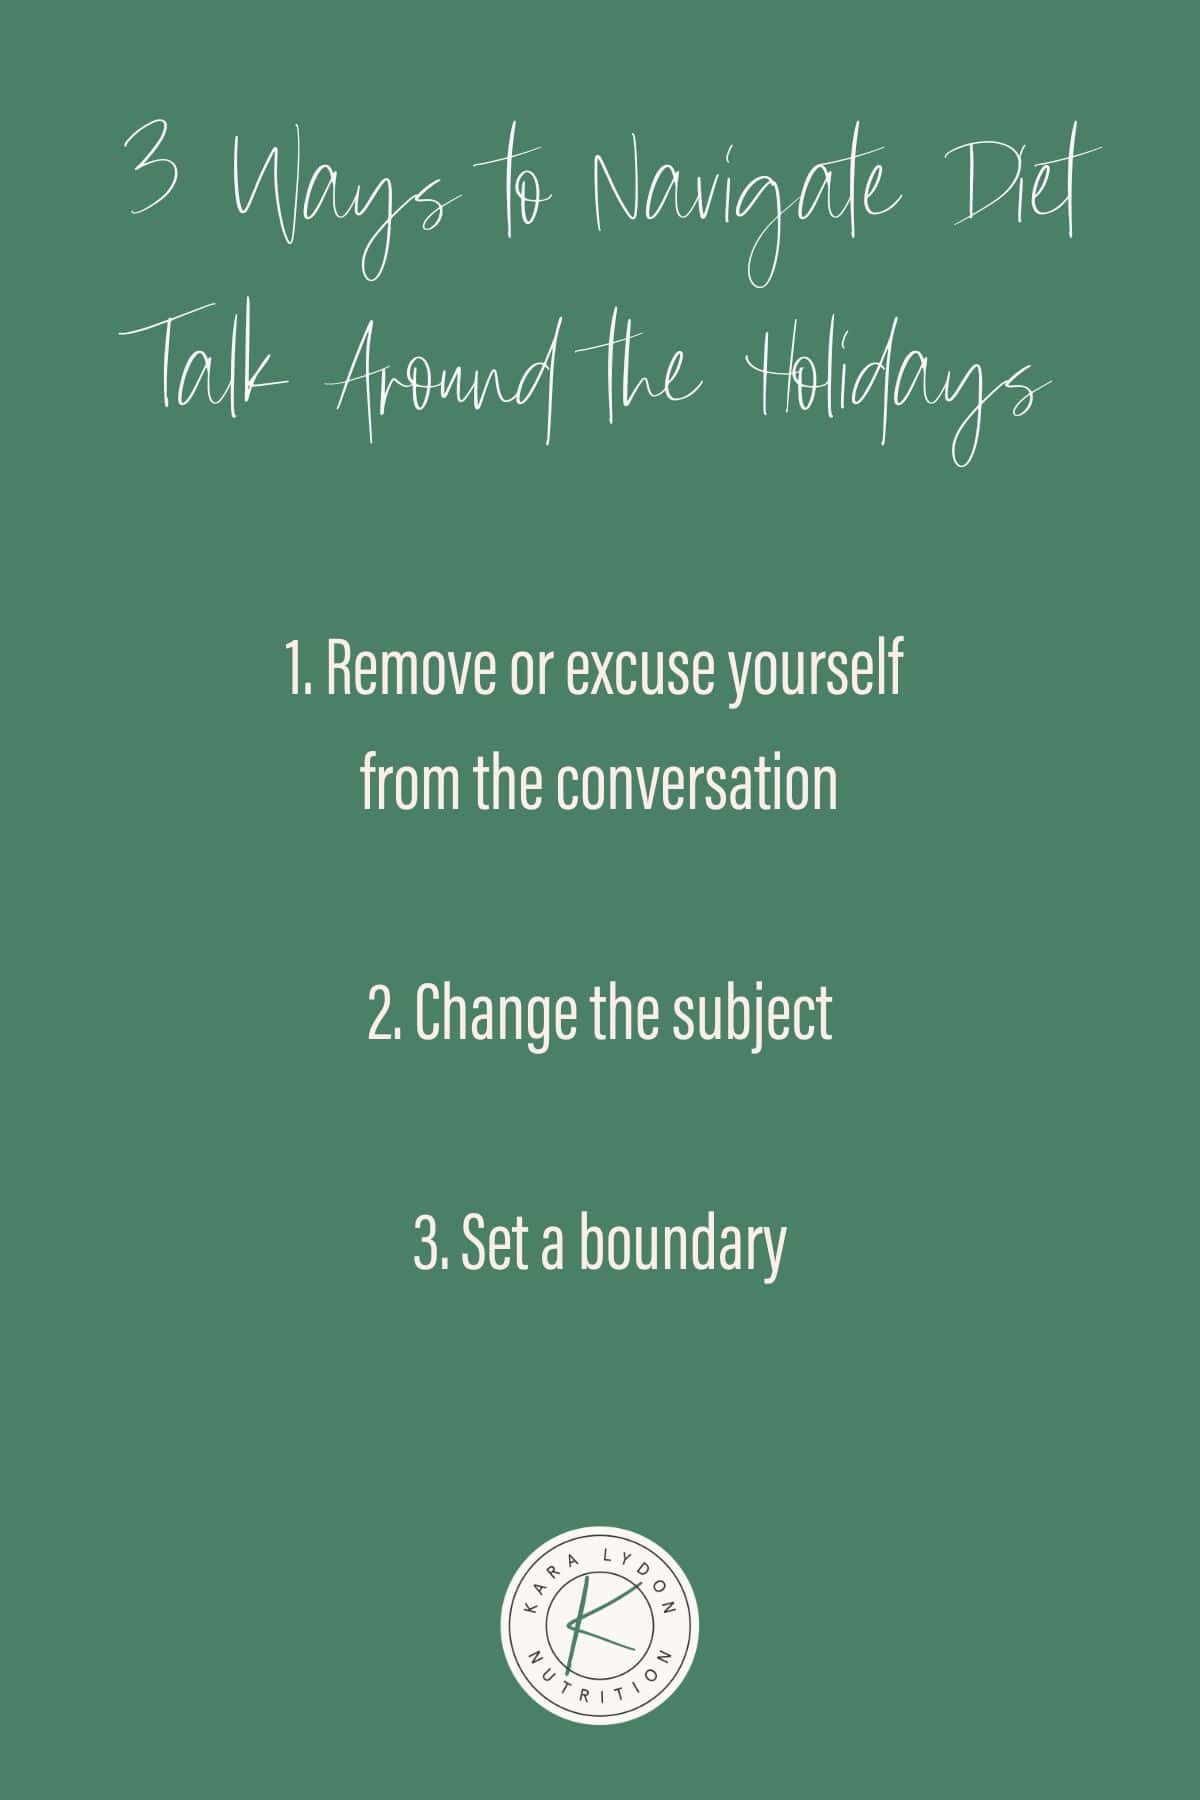 Graphic List 3 Ways to Navigate the Holiday Diet Debate